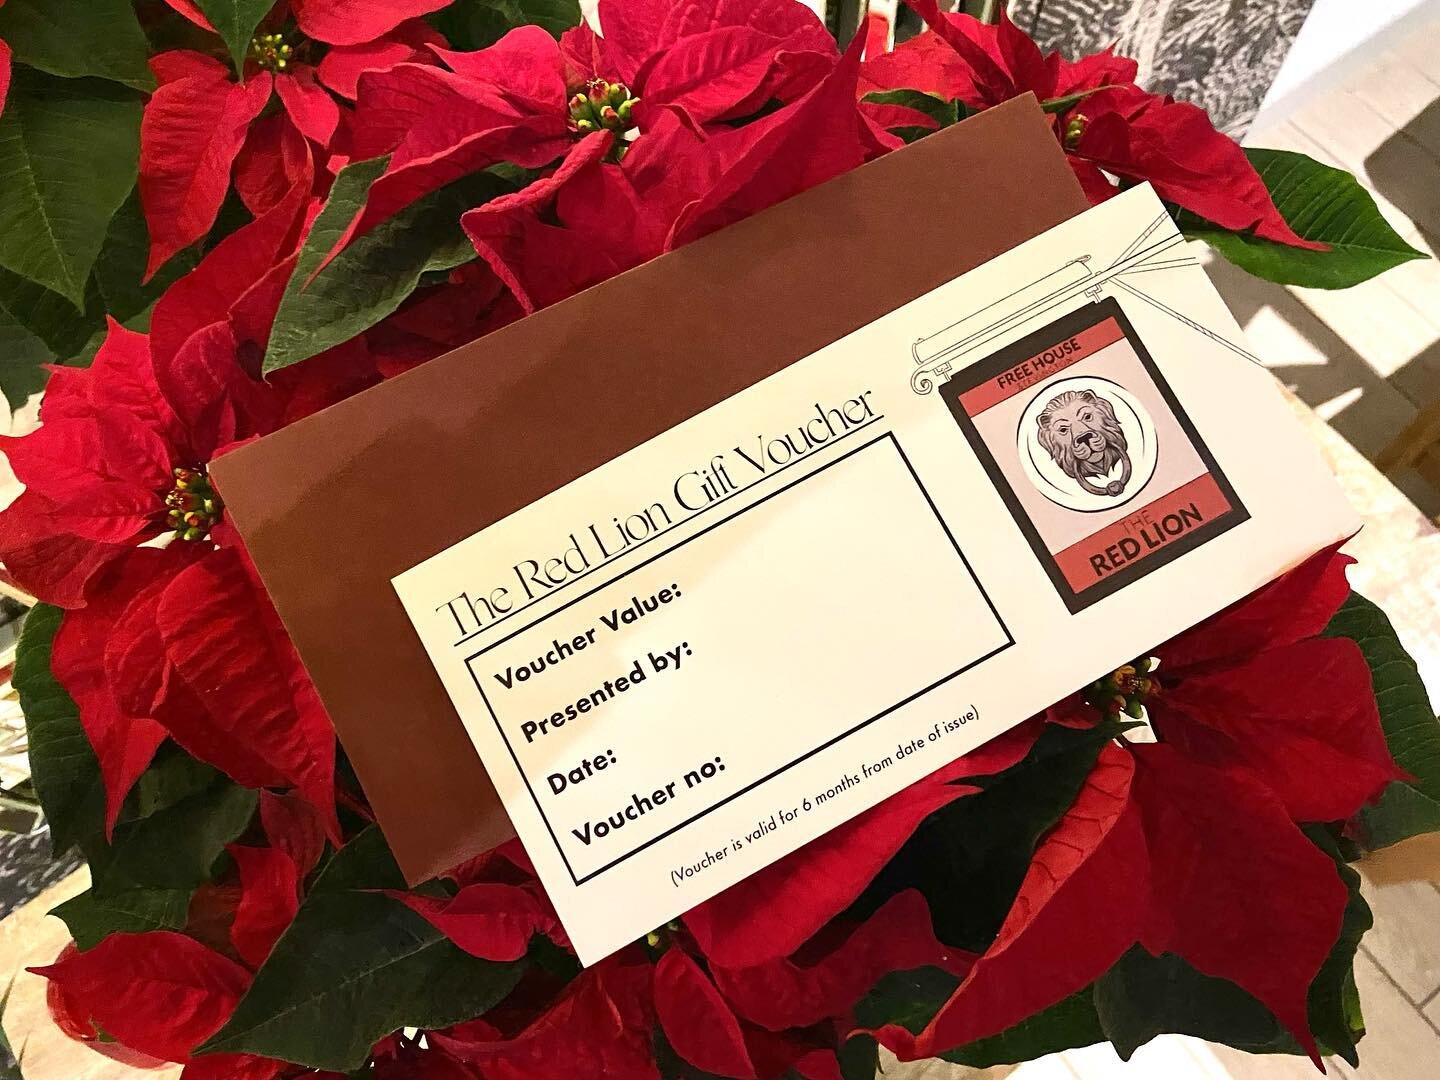 Our gift vouchers are proving a really popular choice for Christmas presents. 

If you&rsquo;d like to gift a delicious dining experience then email hello@redlionstevington.co.uk or call us on 01234 823946! 

#redlion #redlionstevington #stevington #